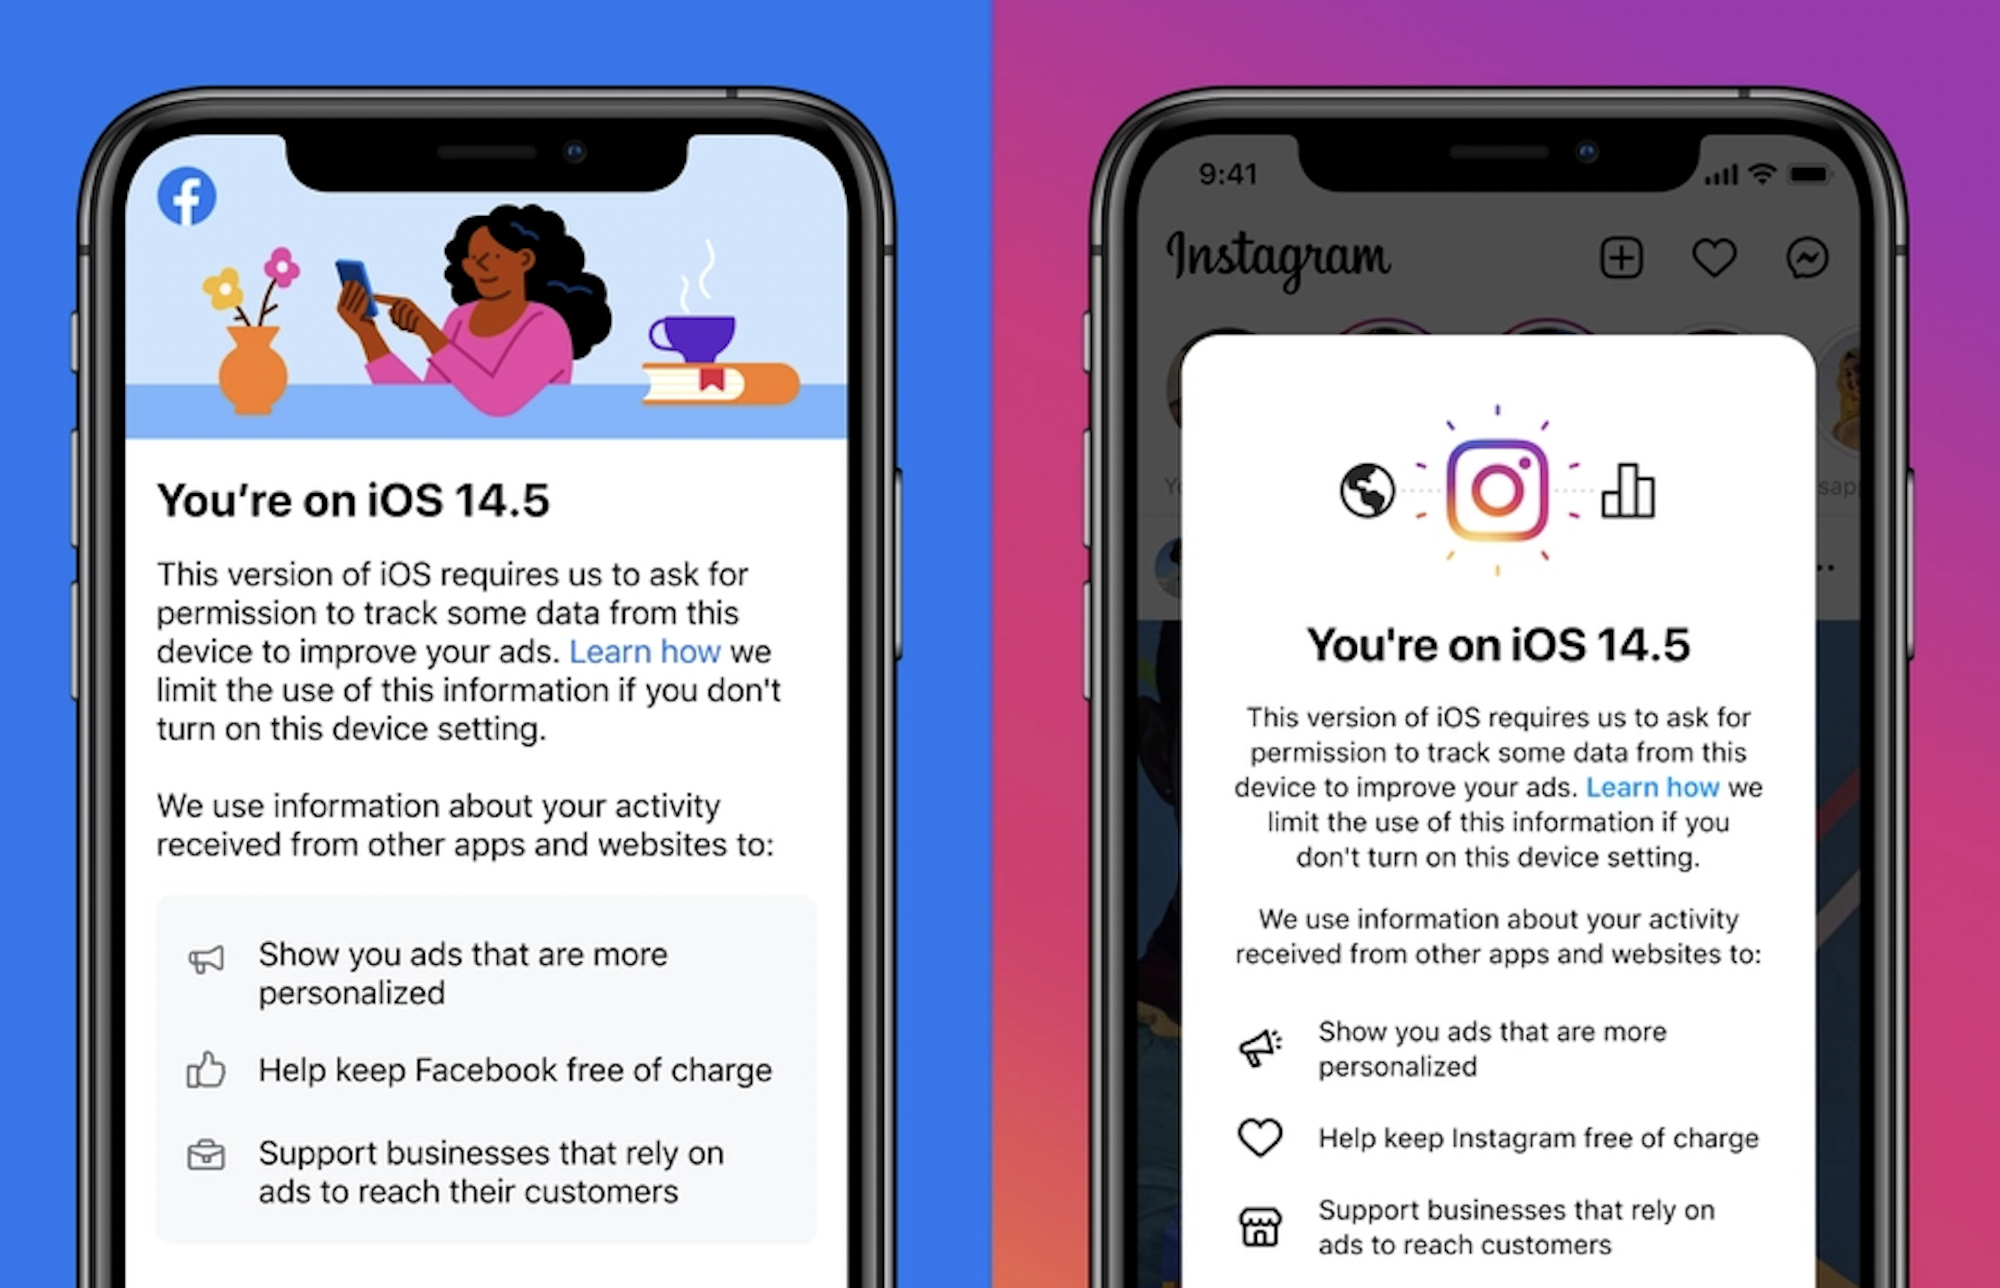 Facebook encourages iOS 14.5 users to enable tracking so its apps remain  'free of charge' - 9to5Mac